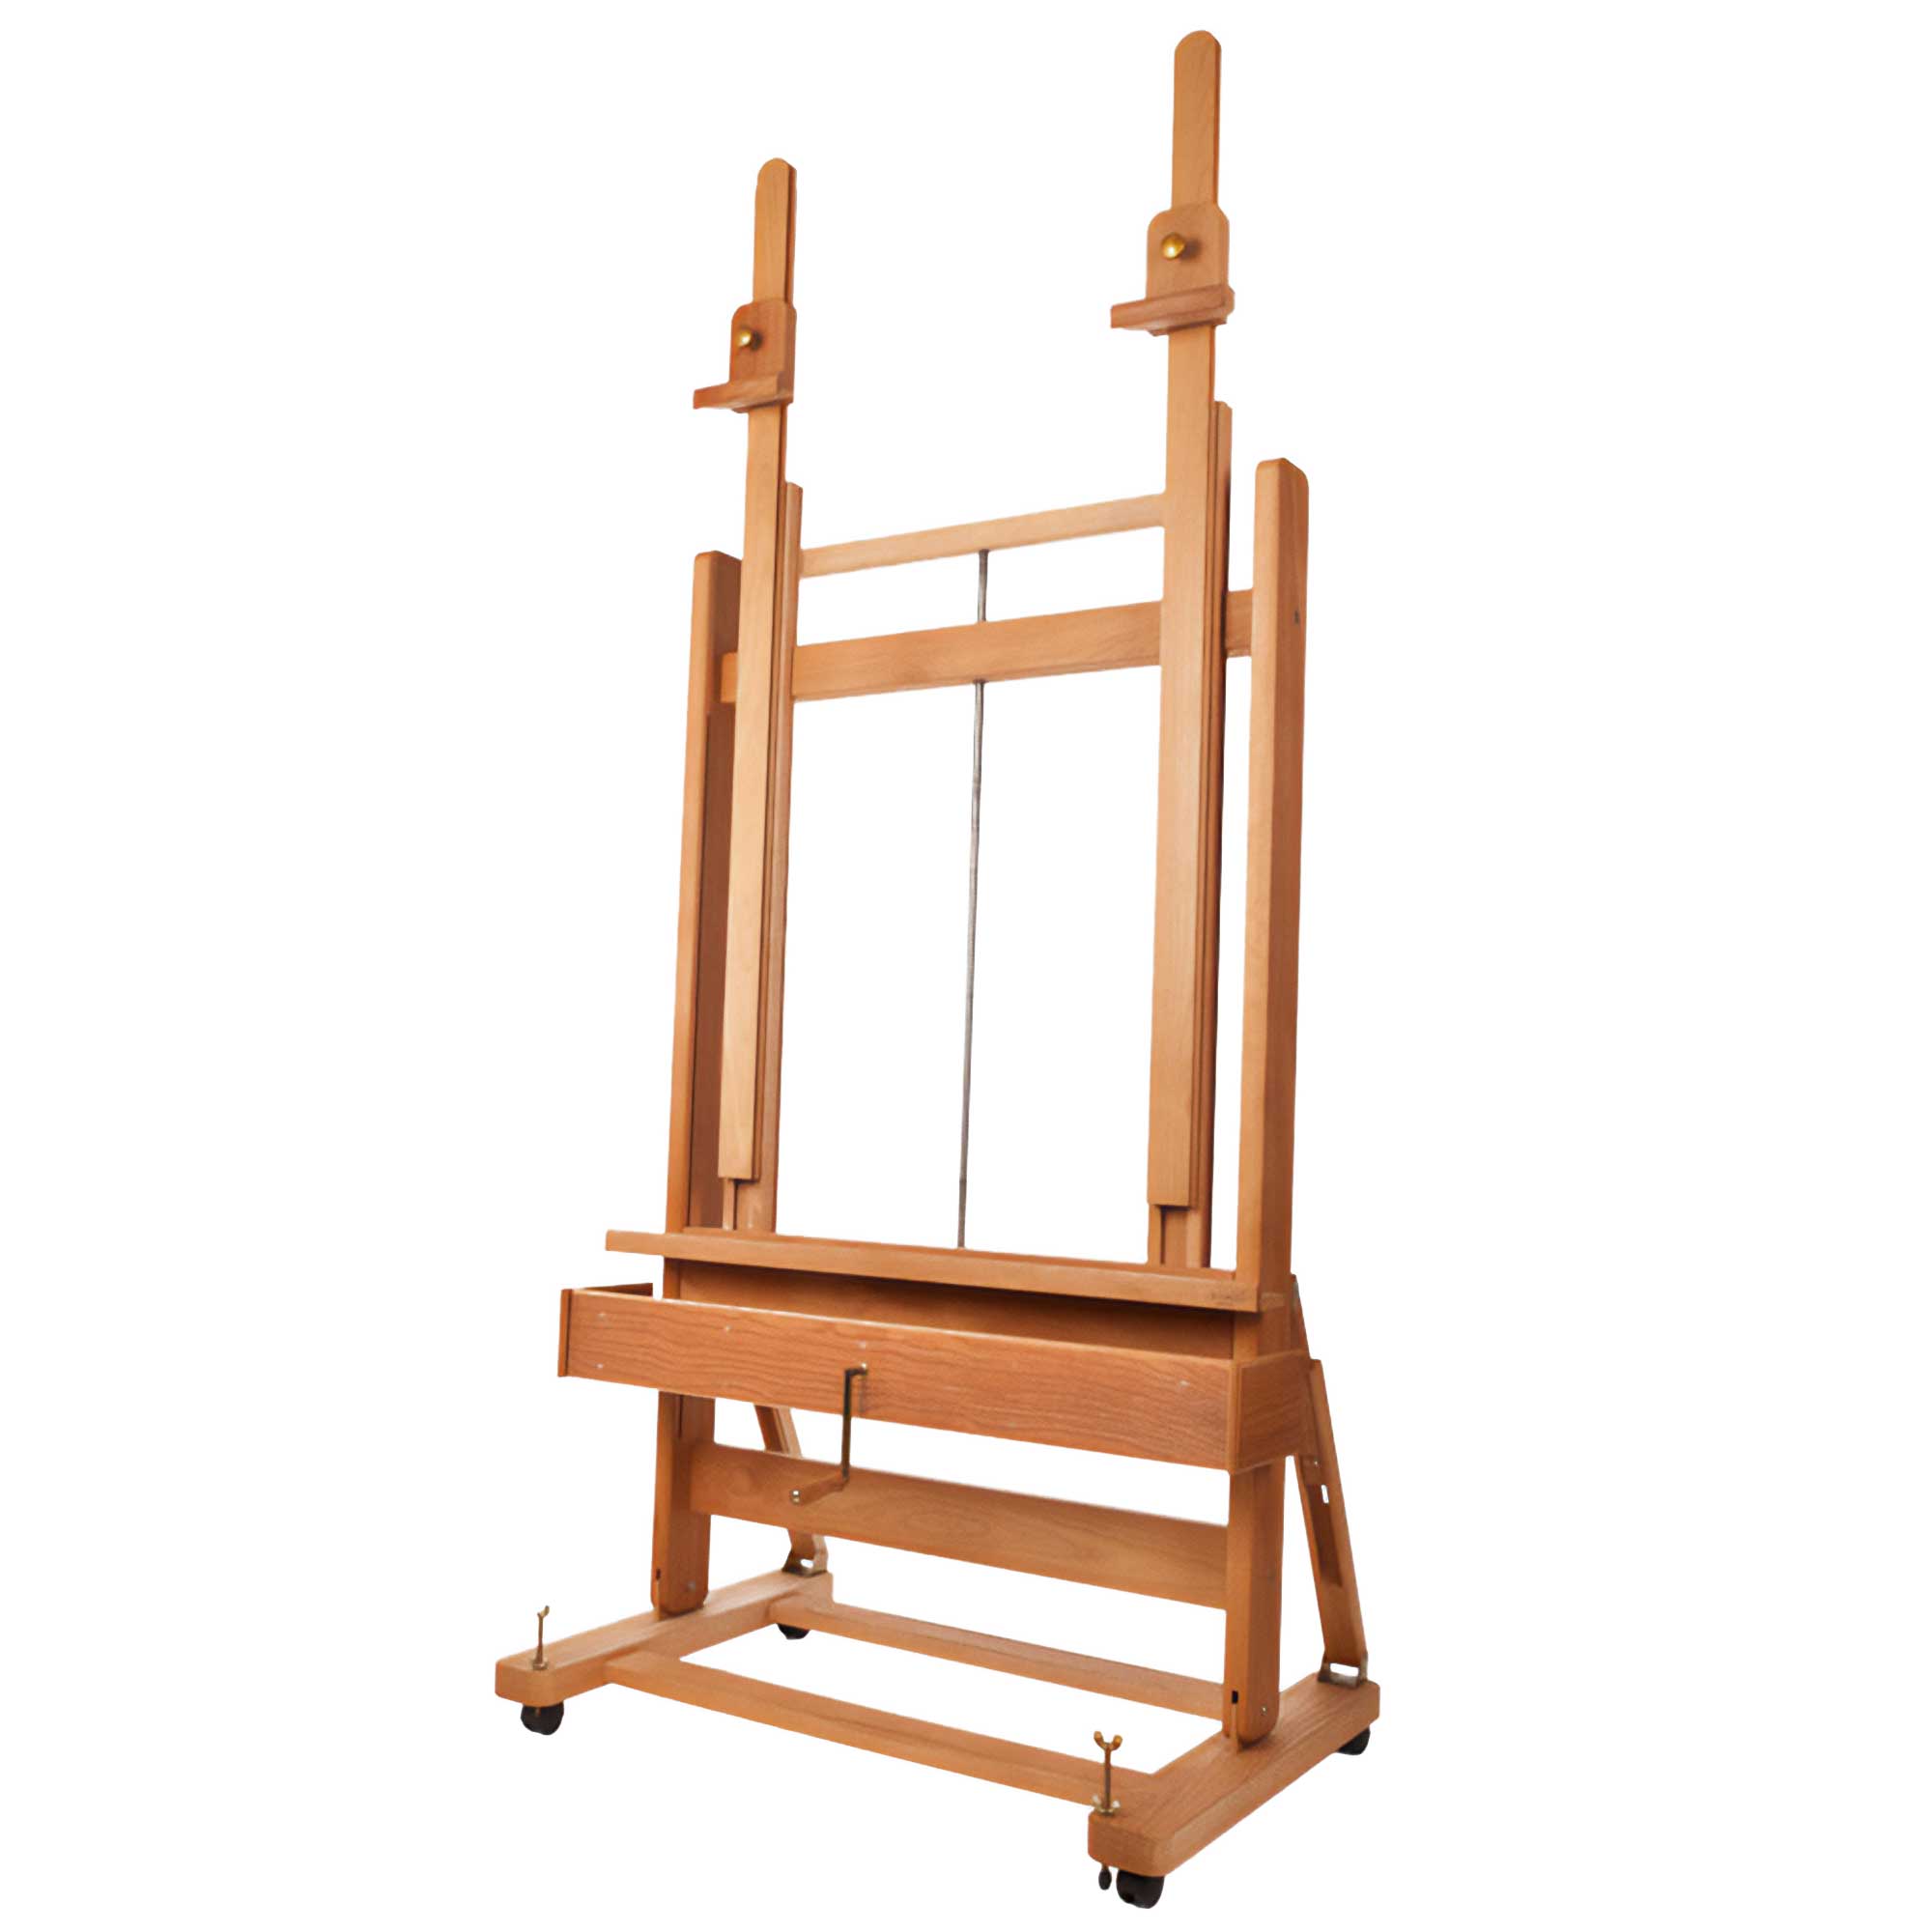 Mabef M02 Heavyweight Studio Easel